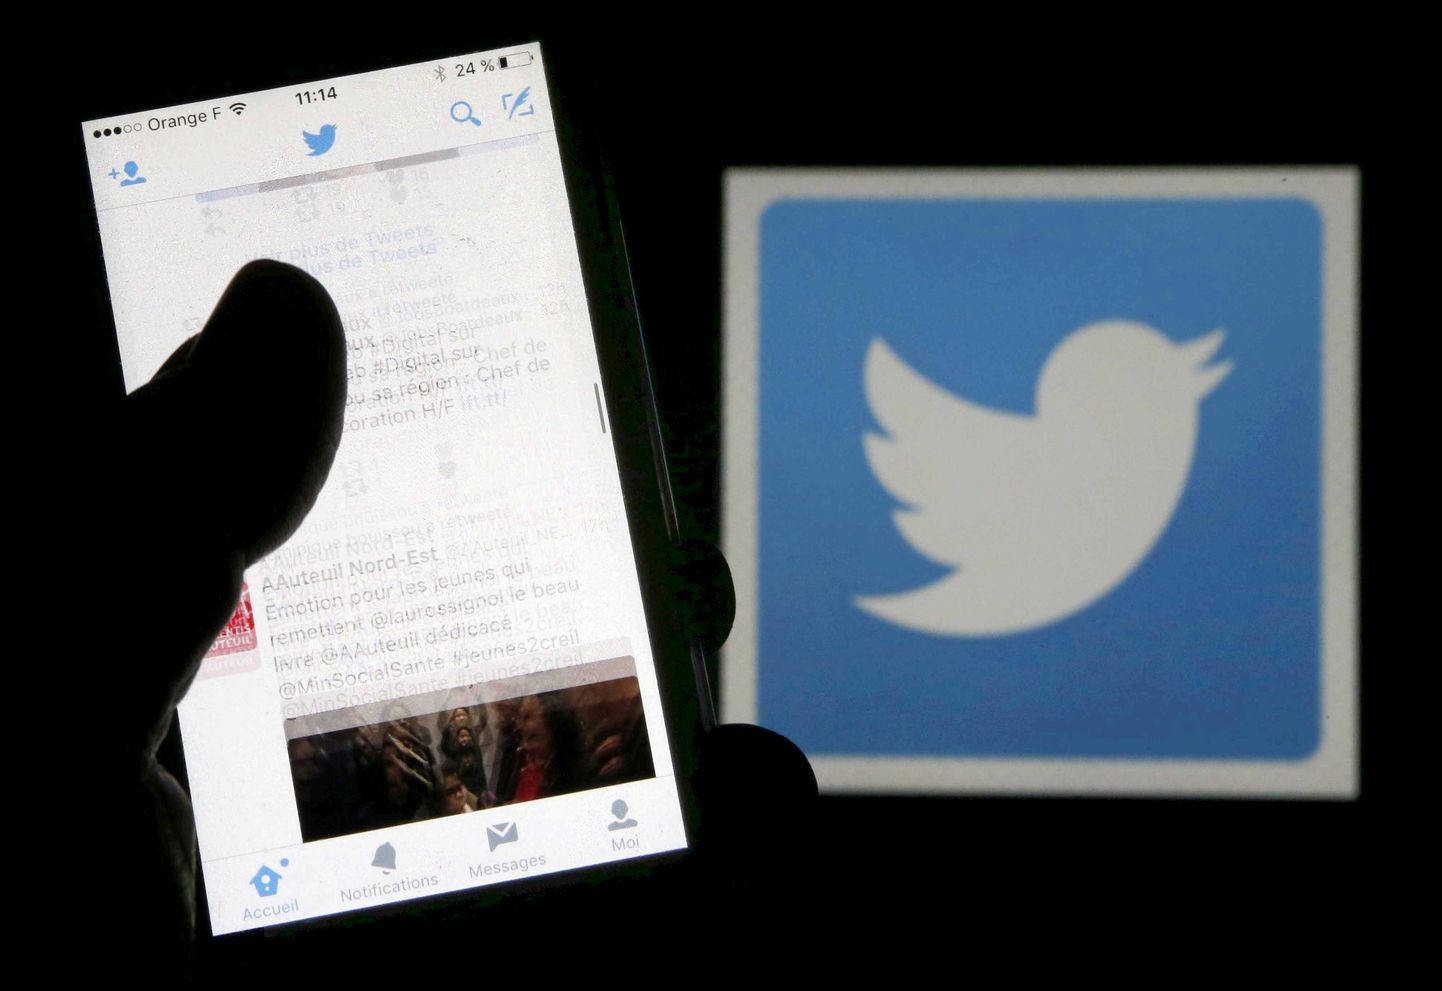 FILE PHOTO: A man reads tweets on his phone in front of a displayed Twitter logo in Bordeaux, southwestern France, March 10, 2016.  REUTERS/Regis Duvignau/Illustration/File Photo